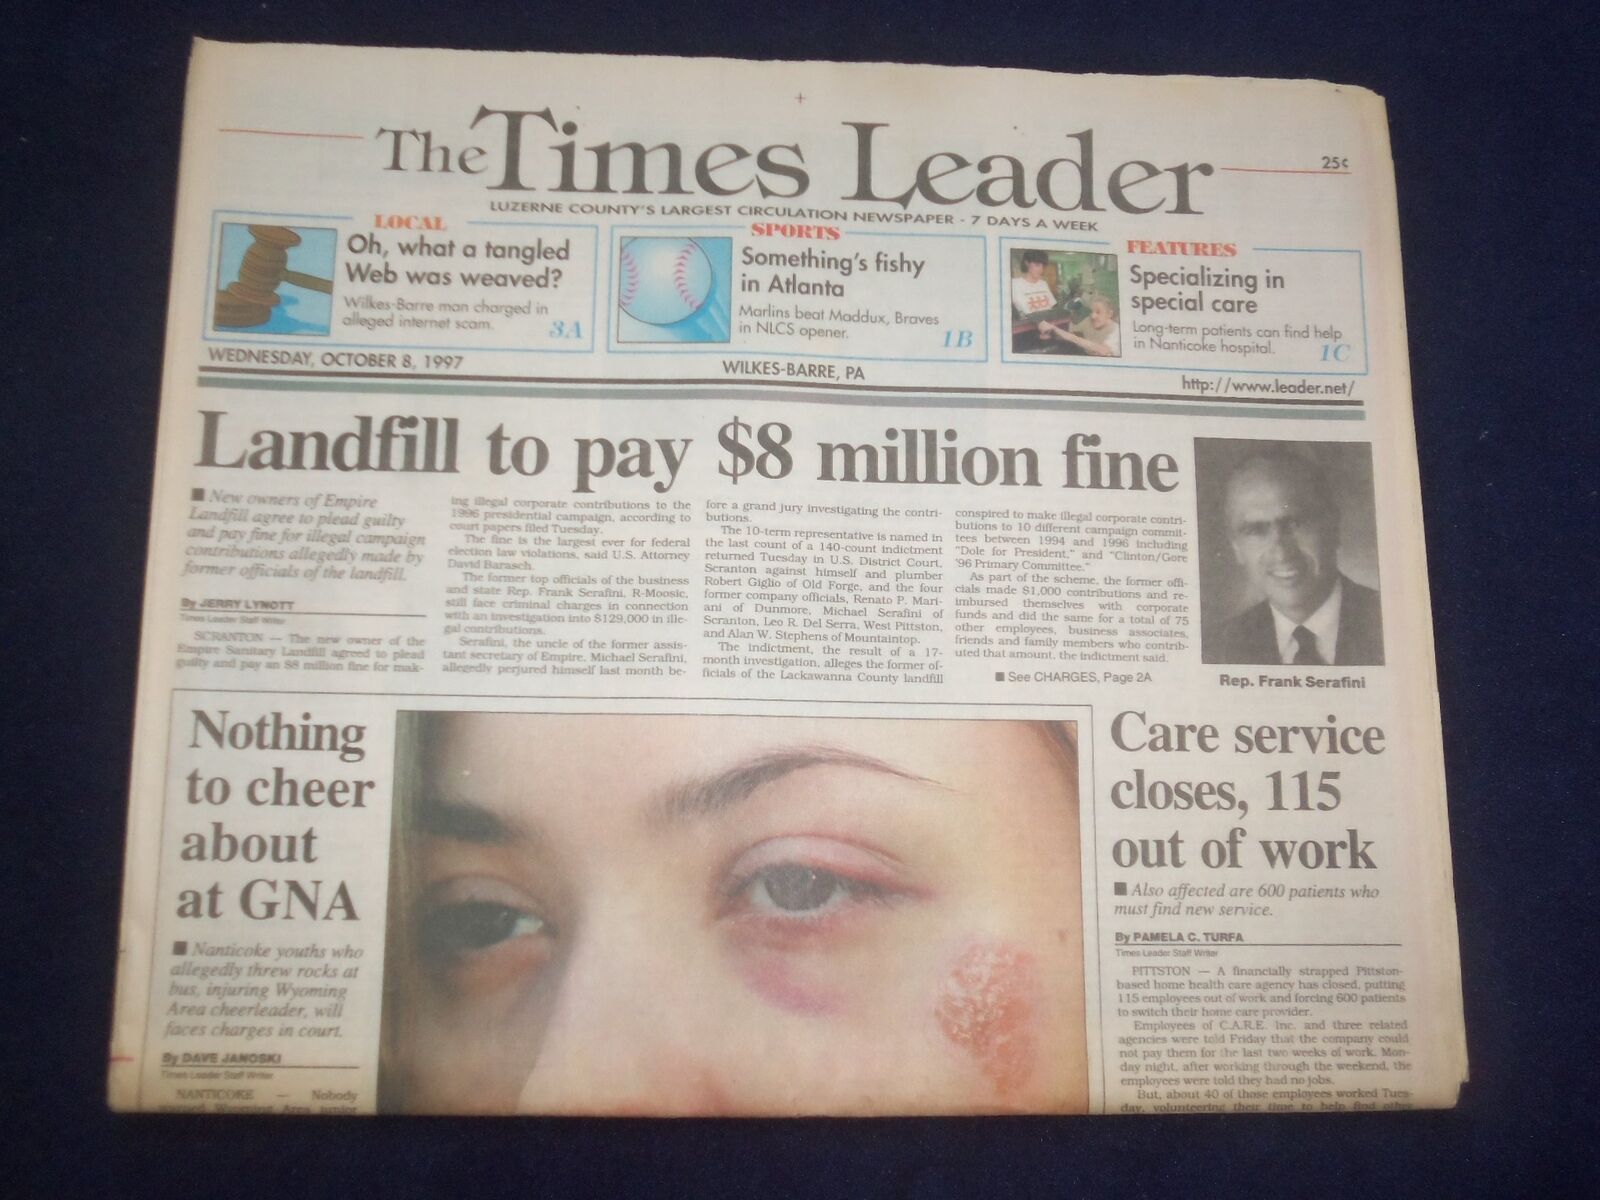 1997 OCT 8 WILKES-BARRE TIMES LEADER - LANDFILL TO PAY $8 MILLION FINE - NP 8199